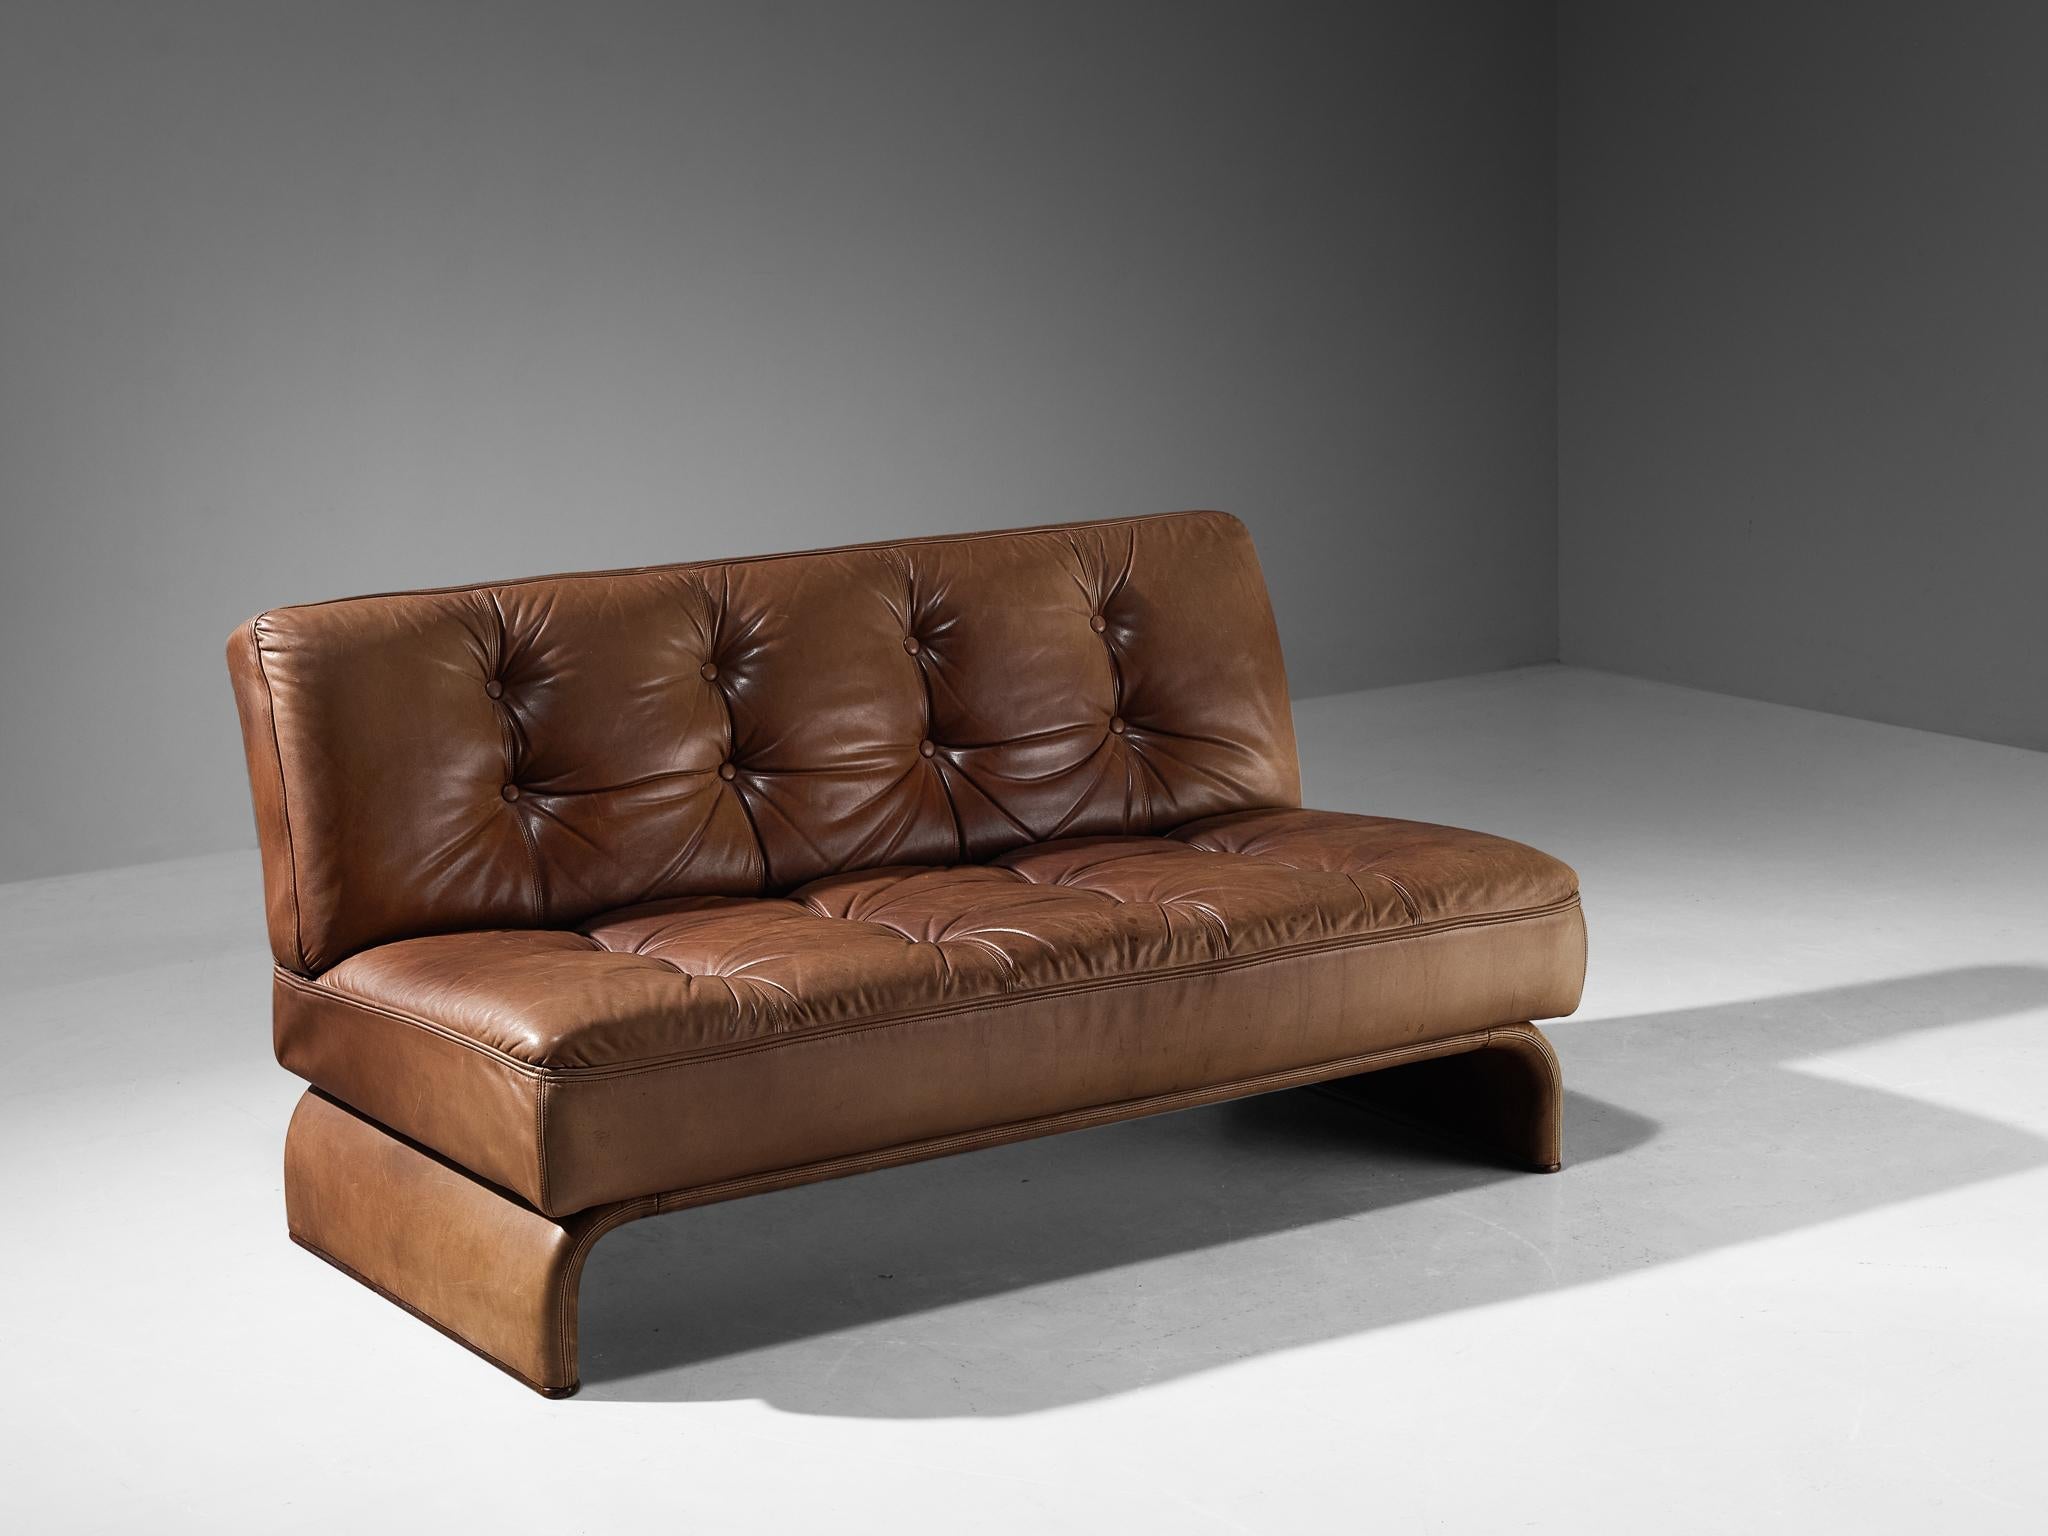 Johannes Spalt for Wittmann 'Constanze' Sofa or Daybed in Cognac Leather